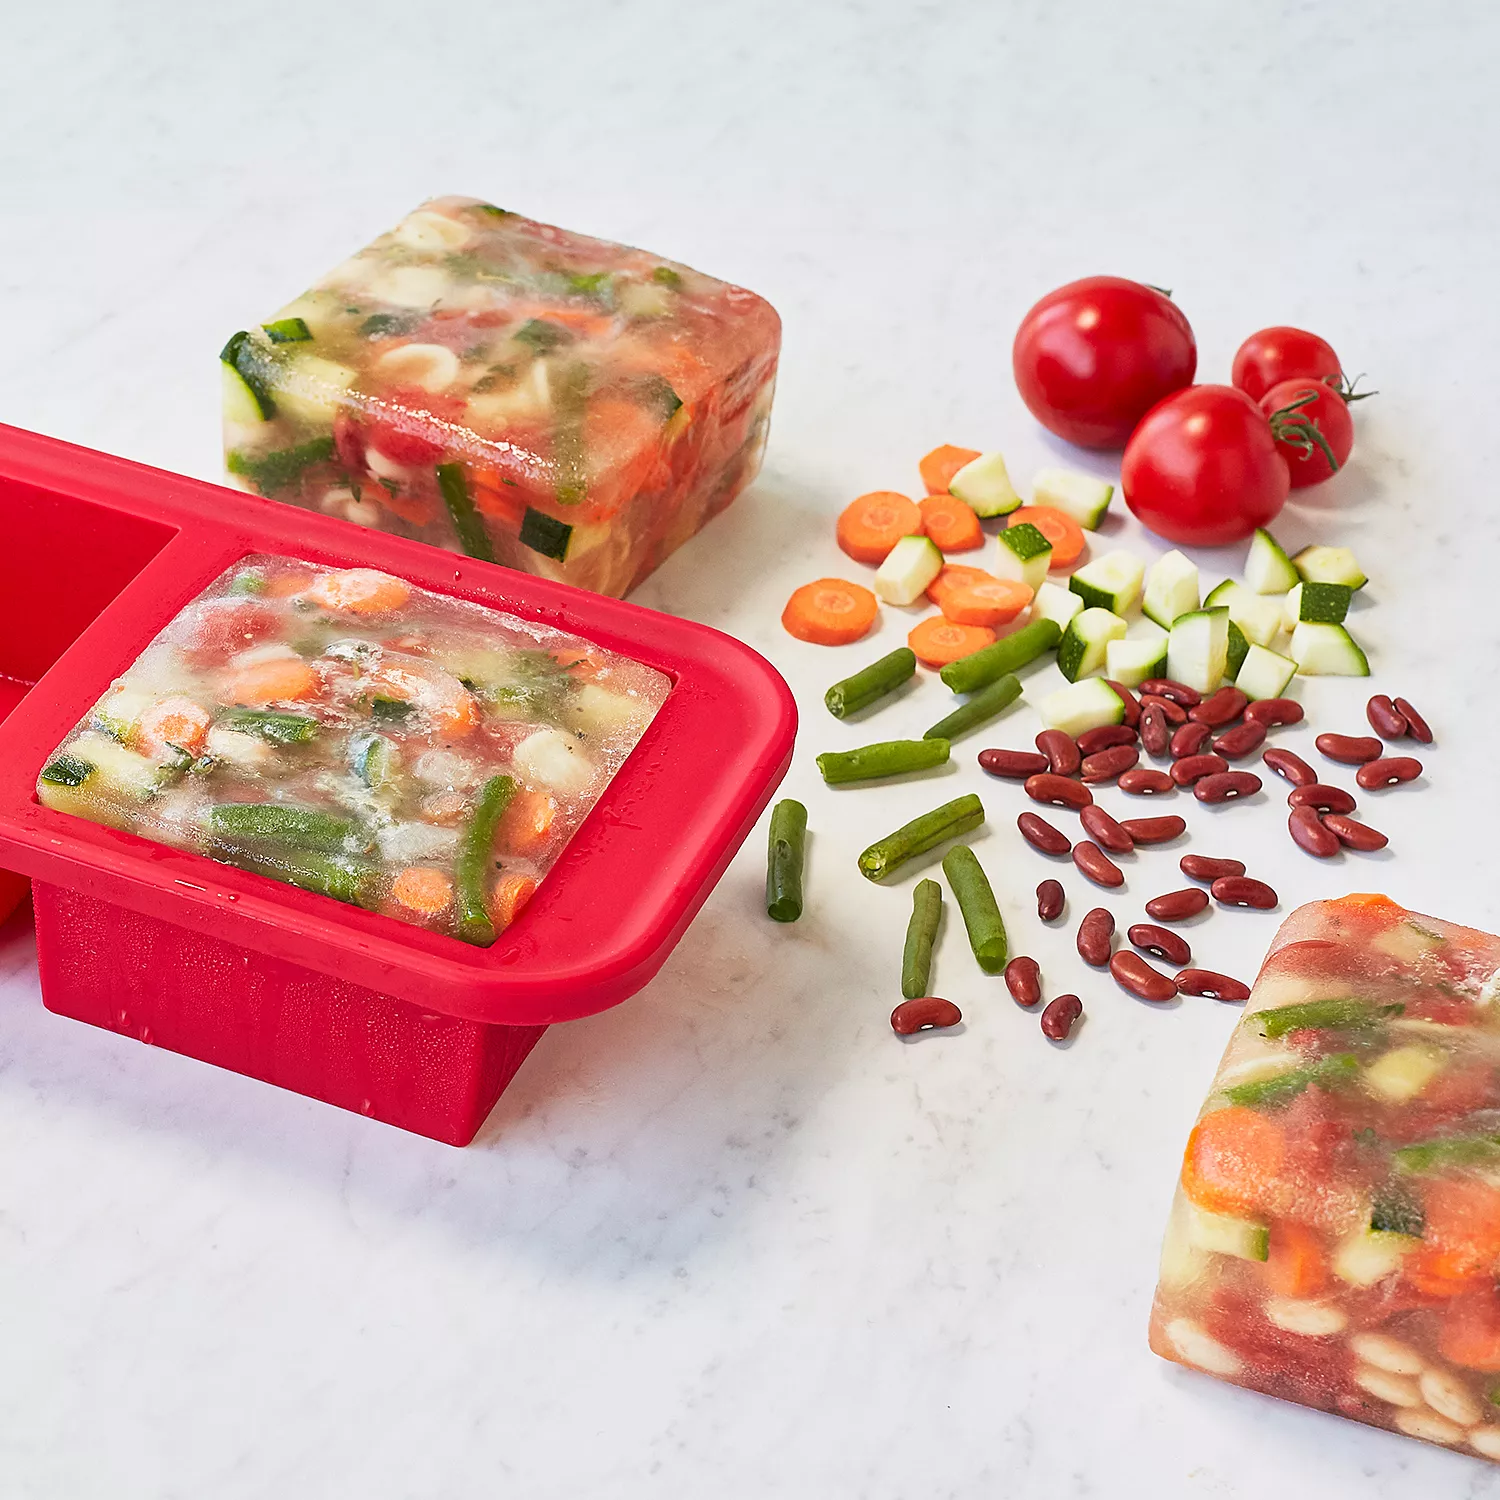 Souper Cubes Are the Easy Way to Freeze Stocks, Soups, and Stews